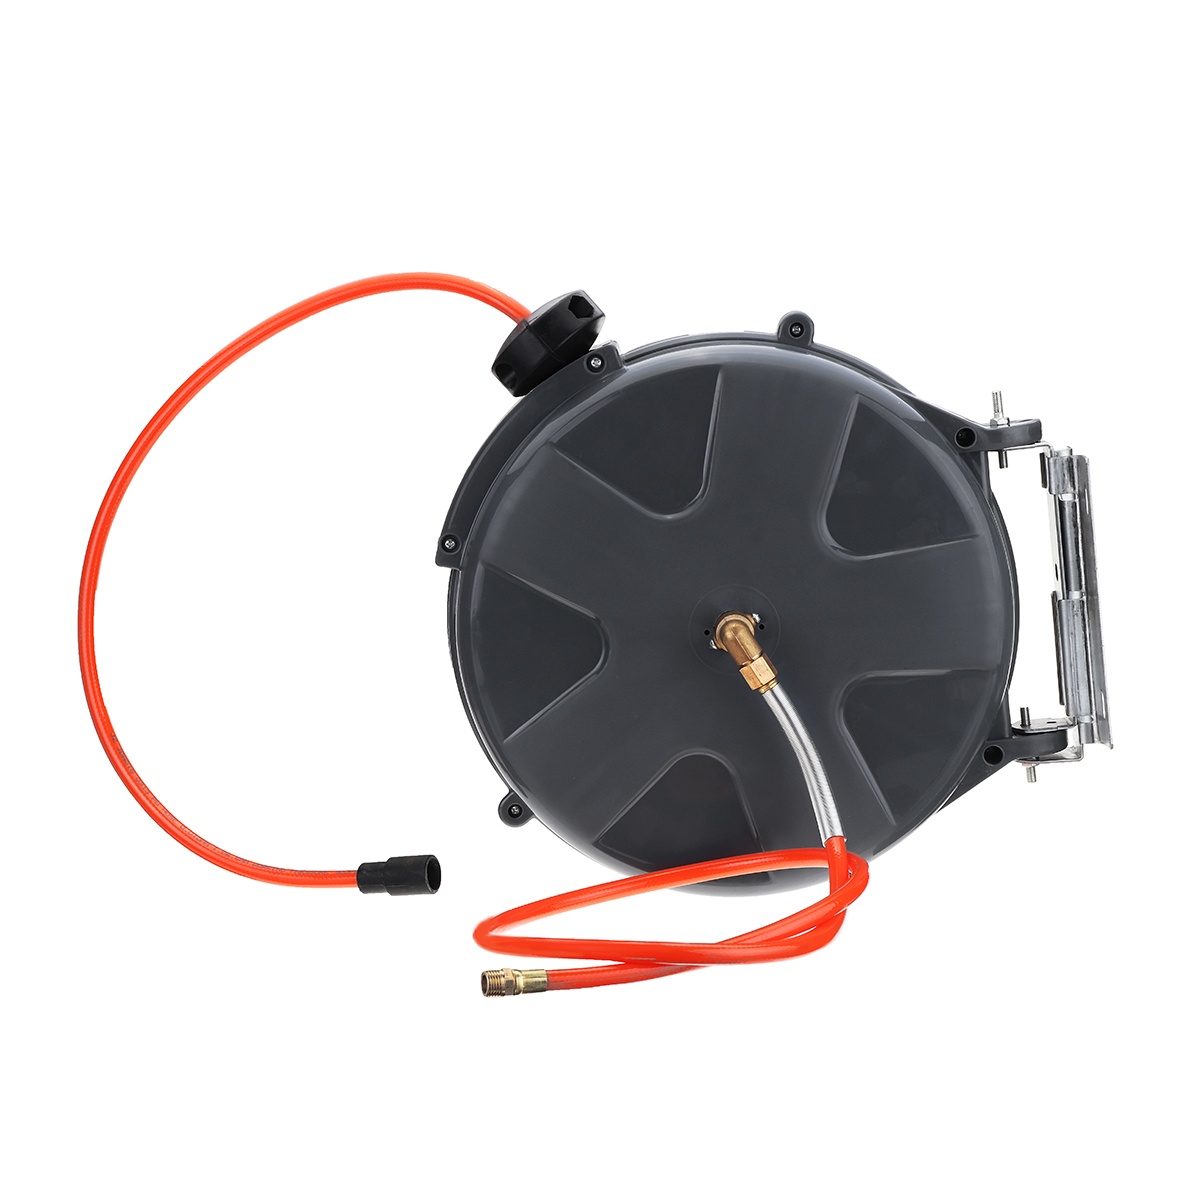 

1/4" X 33' Retractable Auto Rewind Air Hose Reel Cord Reel Rotation Wall Mount 260 PSI